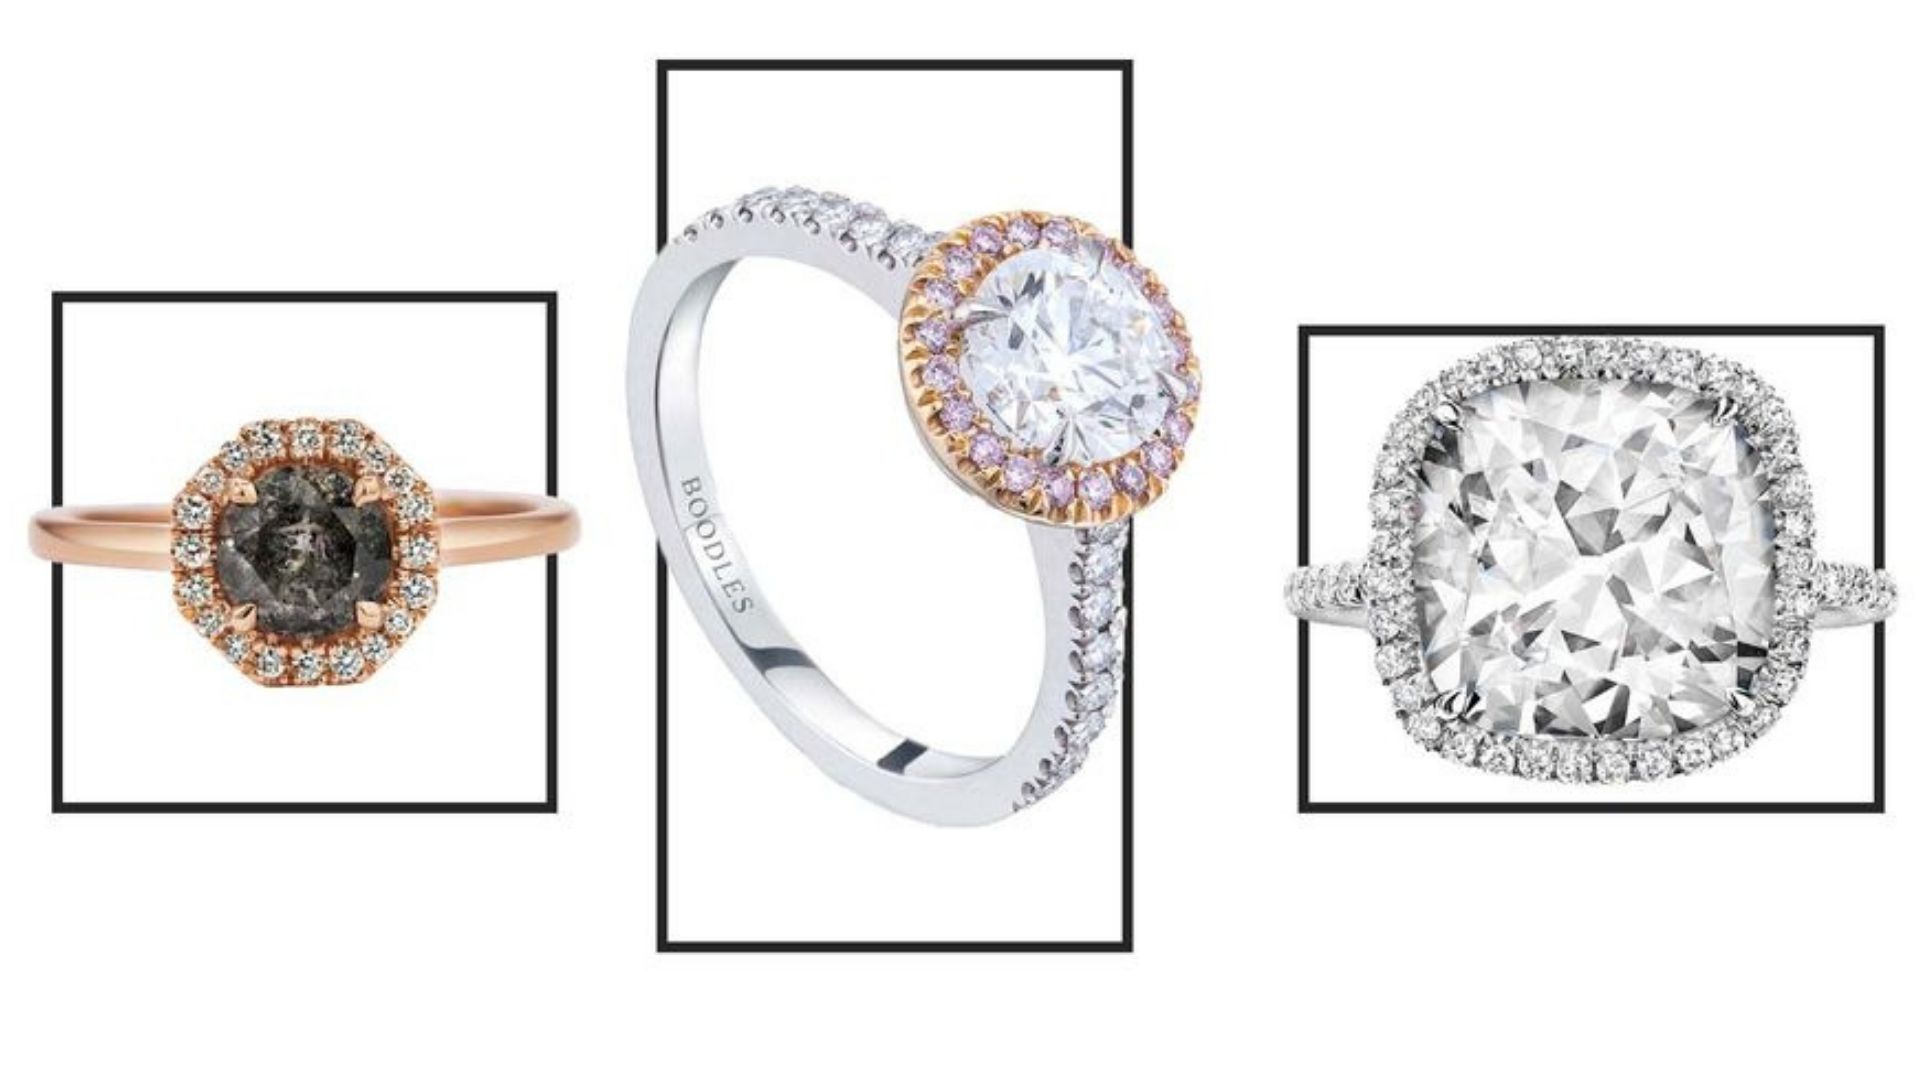 7 Most Expensive Celebrity Engagement Rings in India